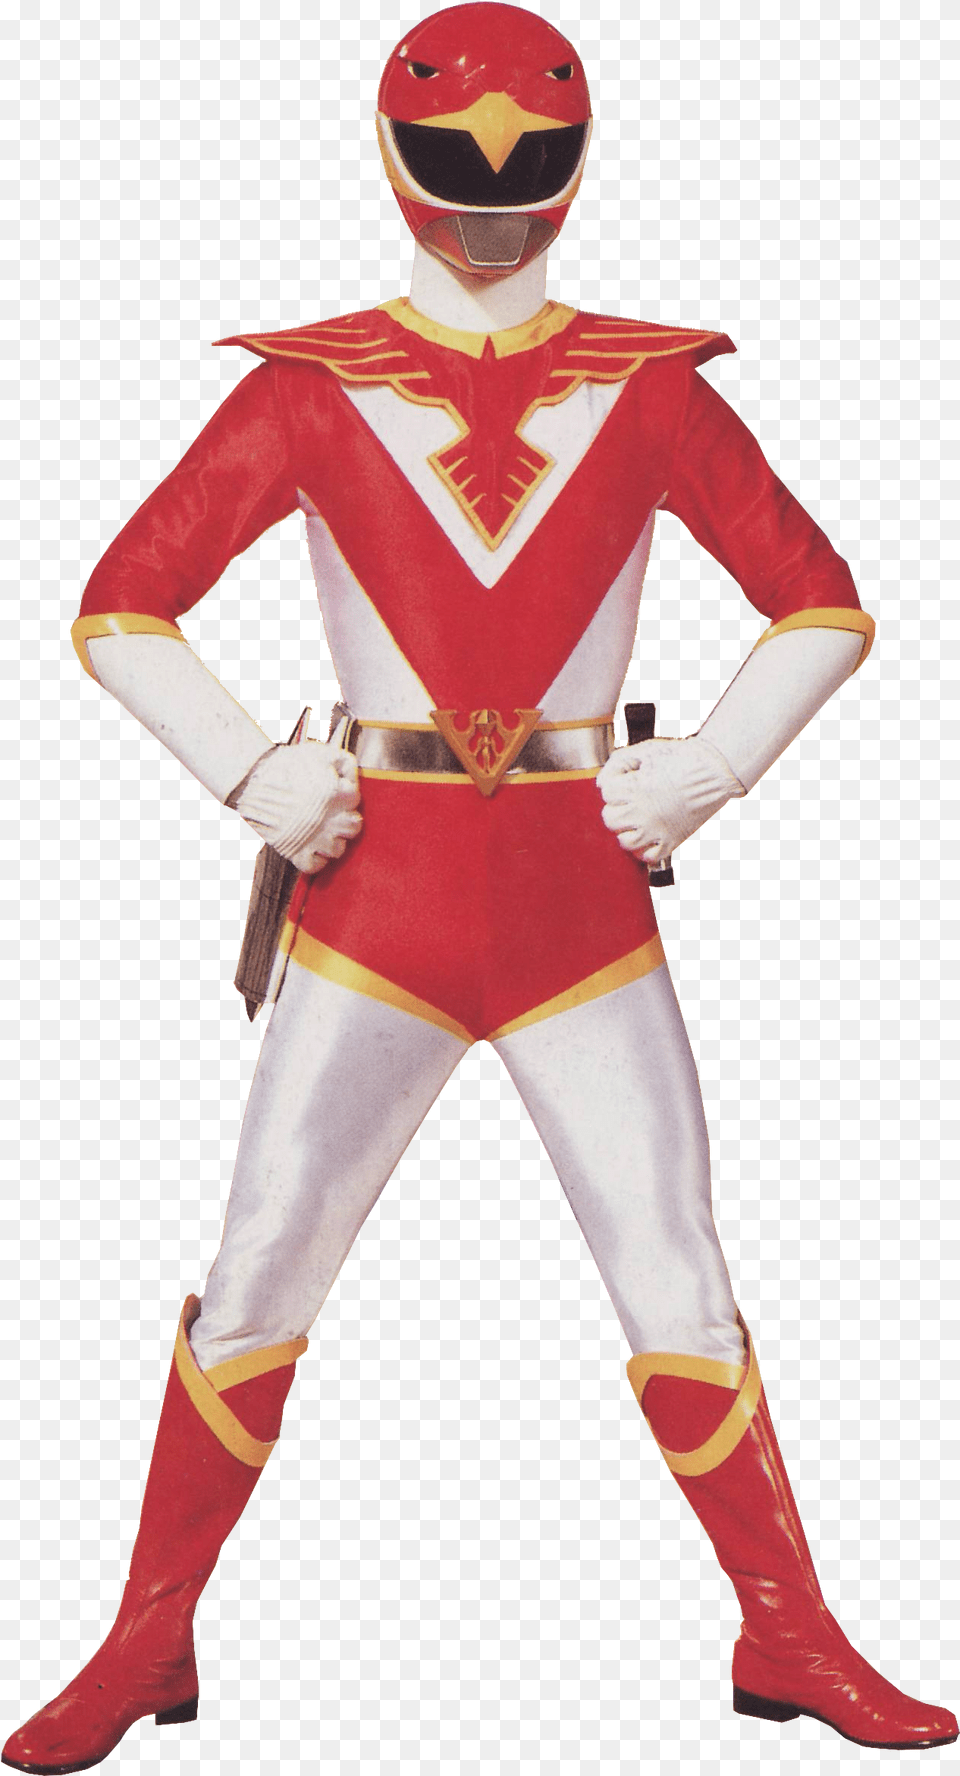 Red Is Always A Hero With A Burning Sence Of Justice Chjin Sentai Jetman Red, Person, Clothing, Costume, Adult Png